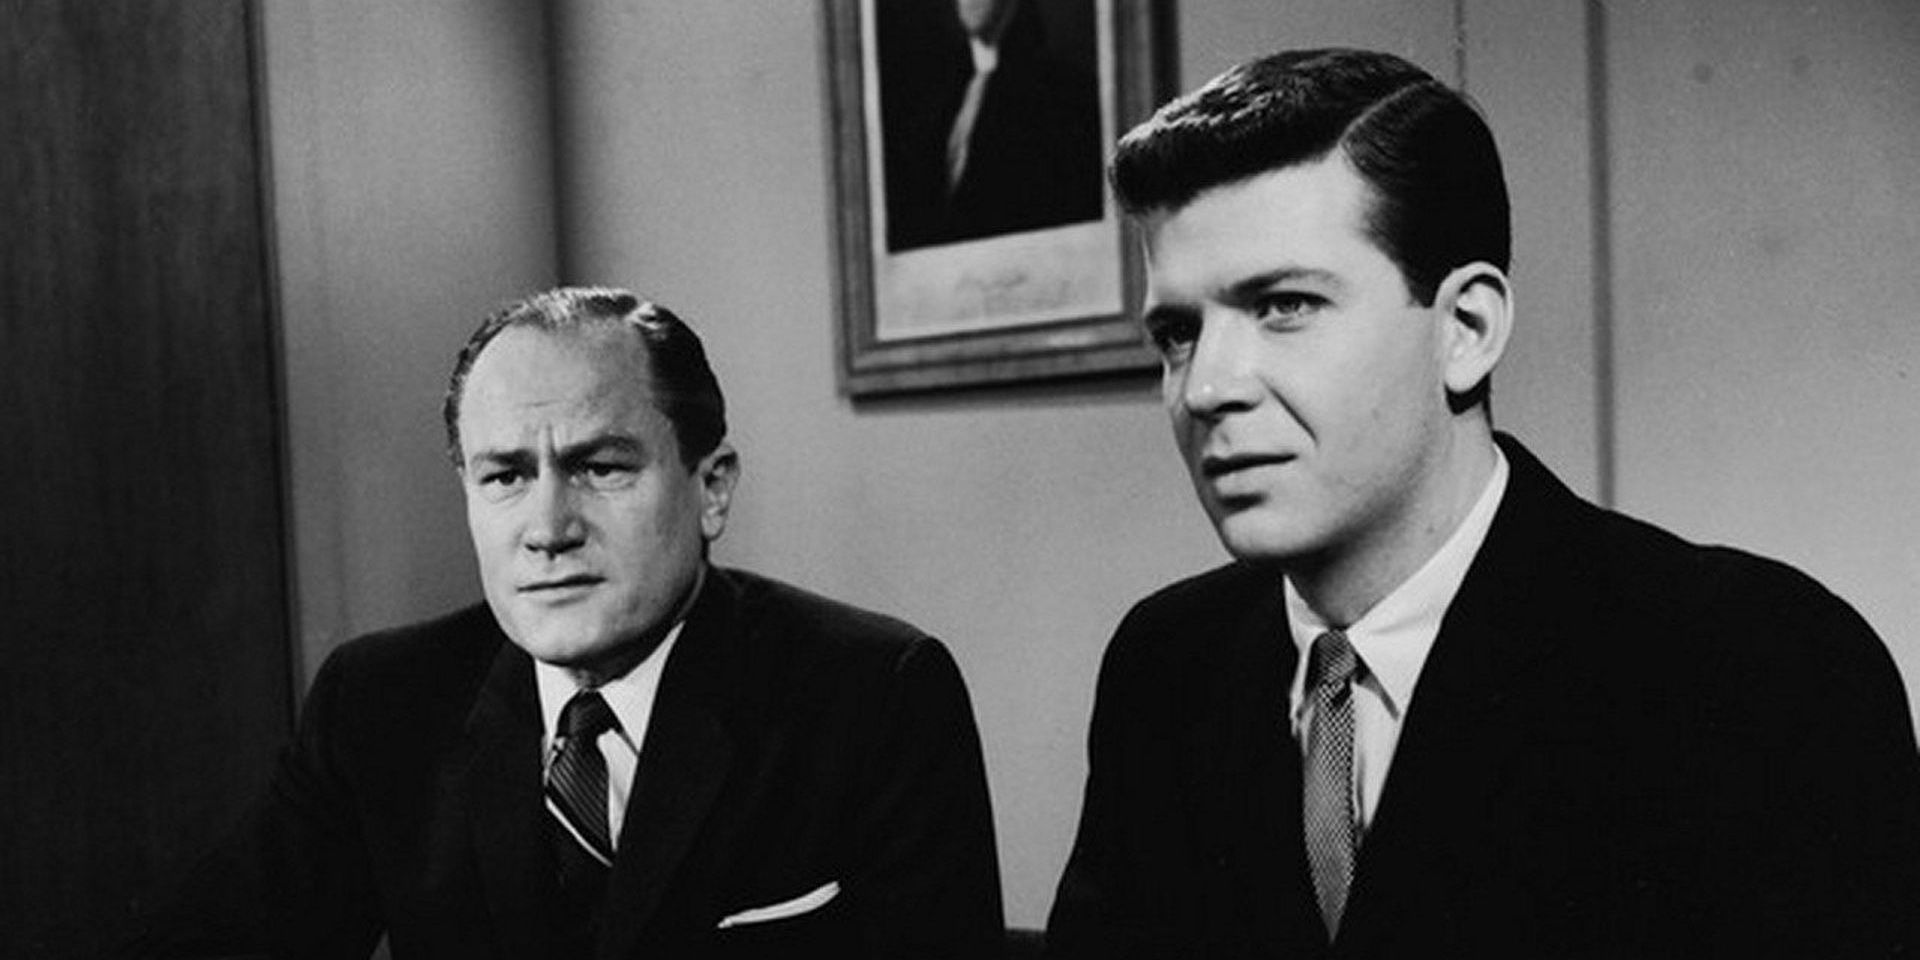 Two men wearing suits in a black and white image from The Defenders